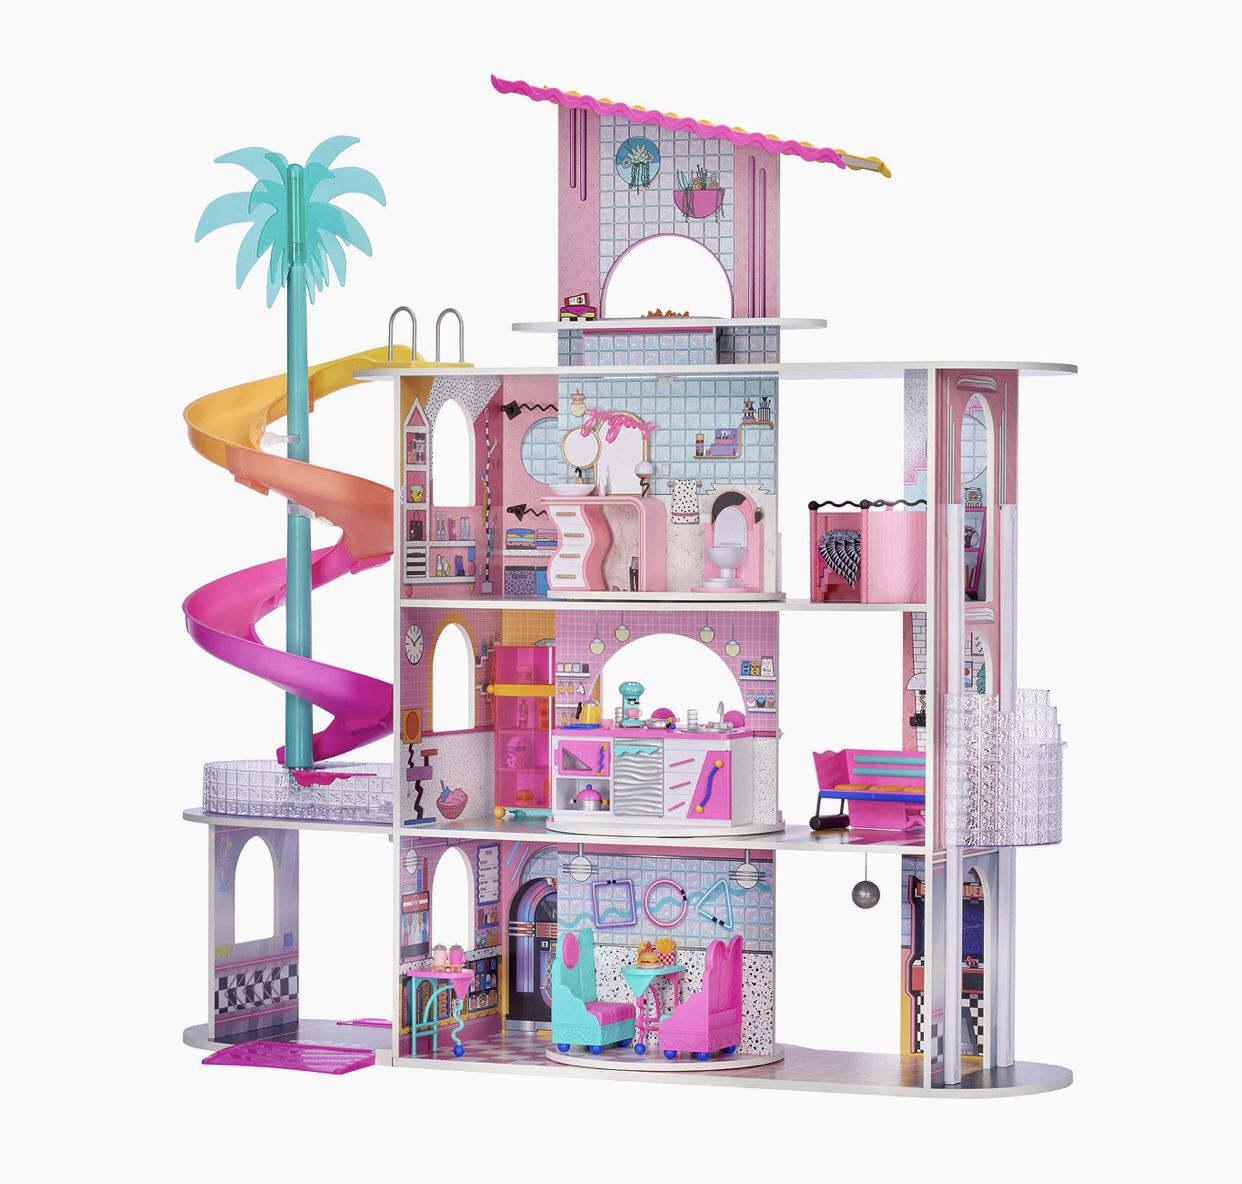 LOL Doll House - Brand New In Box! 